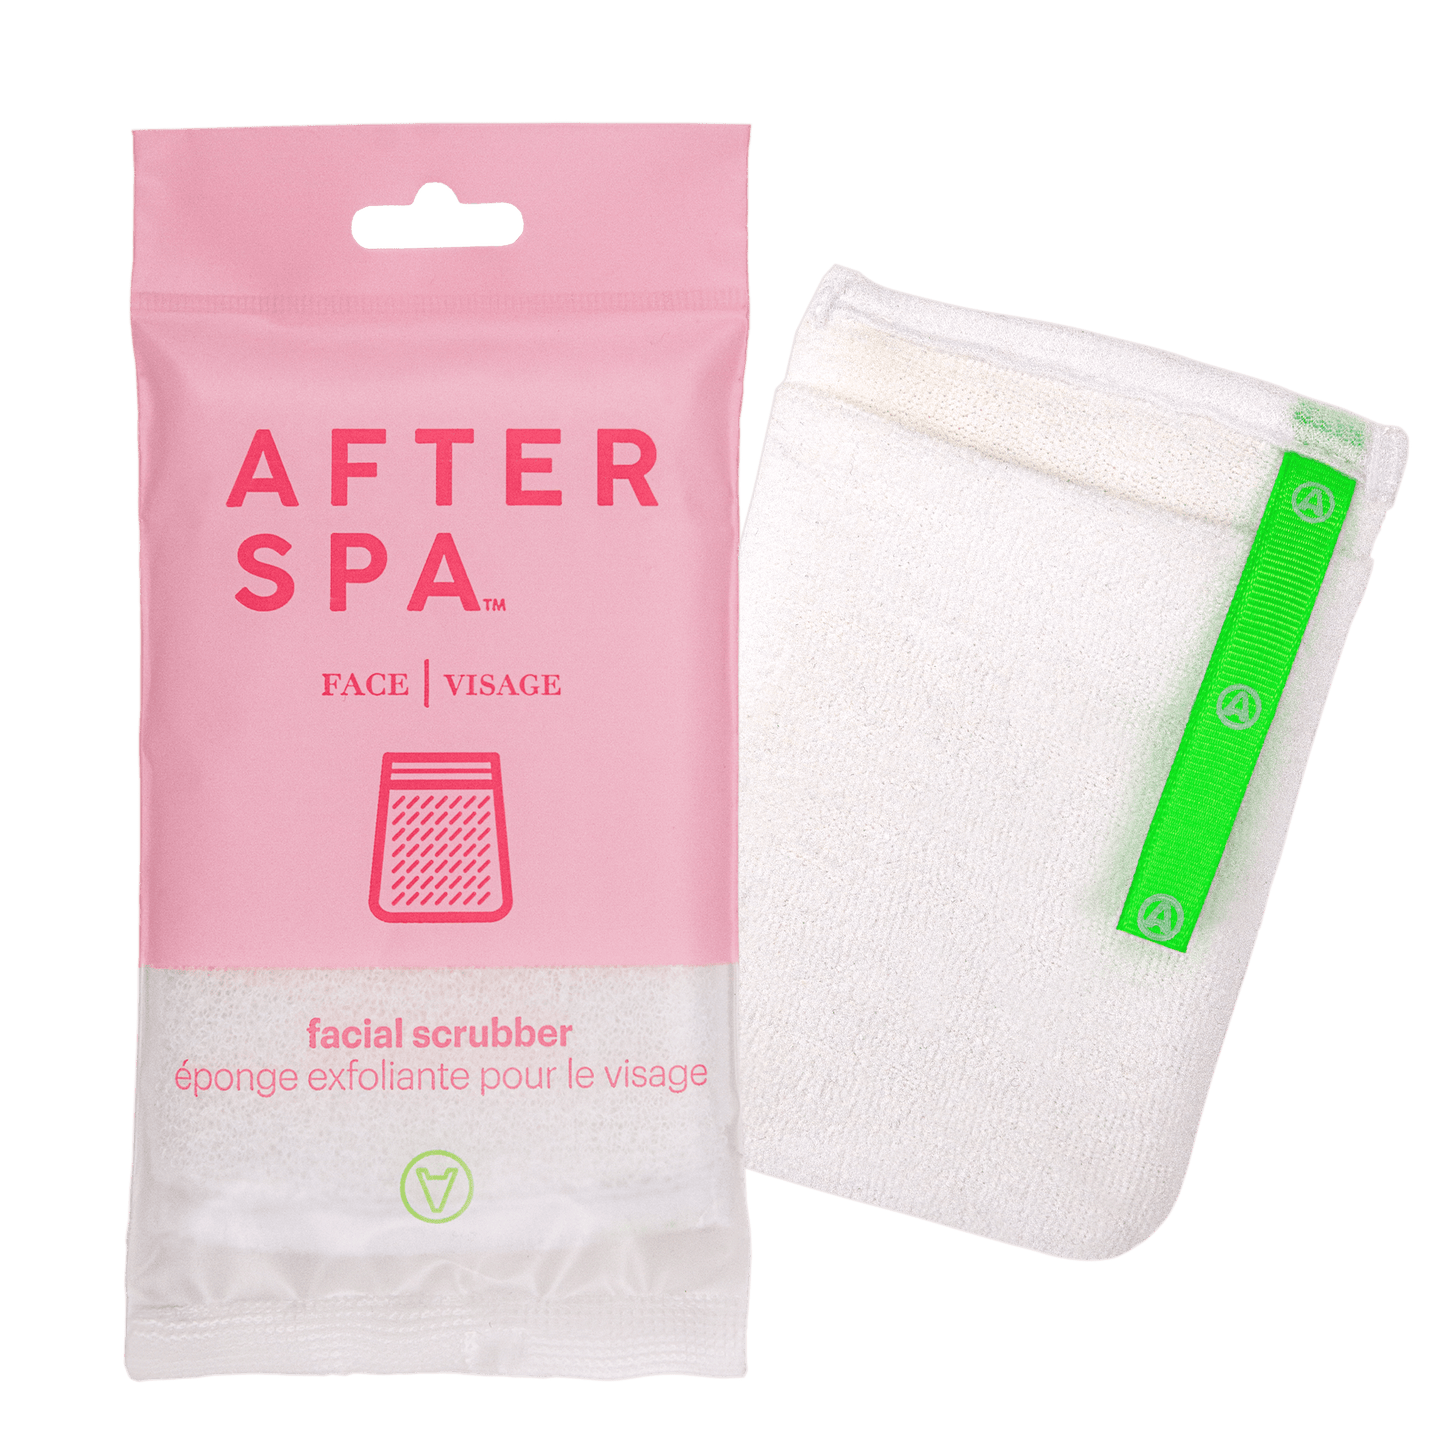 Afterspa Facial Scrubber _ Scrubber to exfoliate the face.